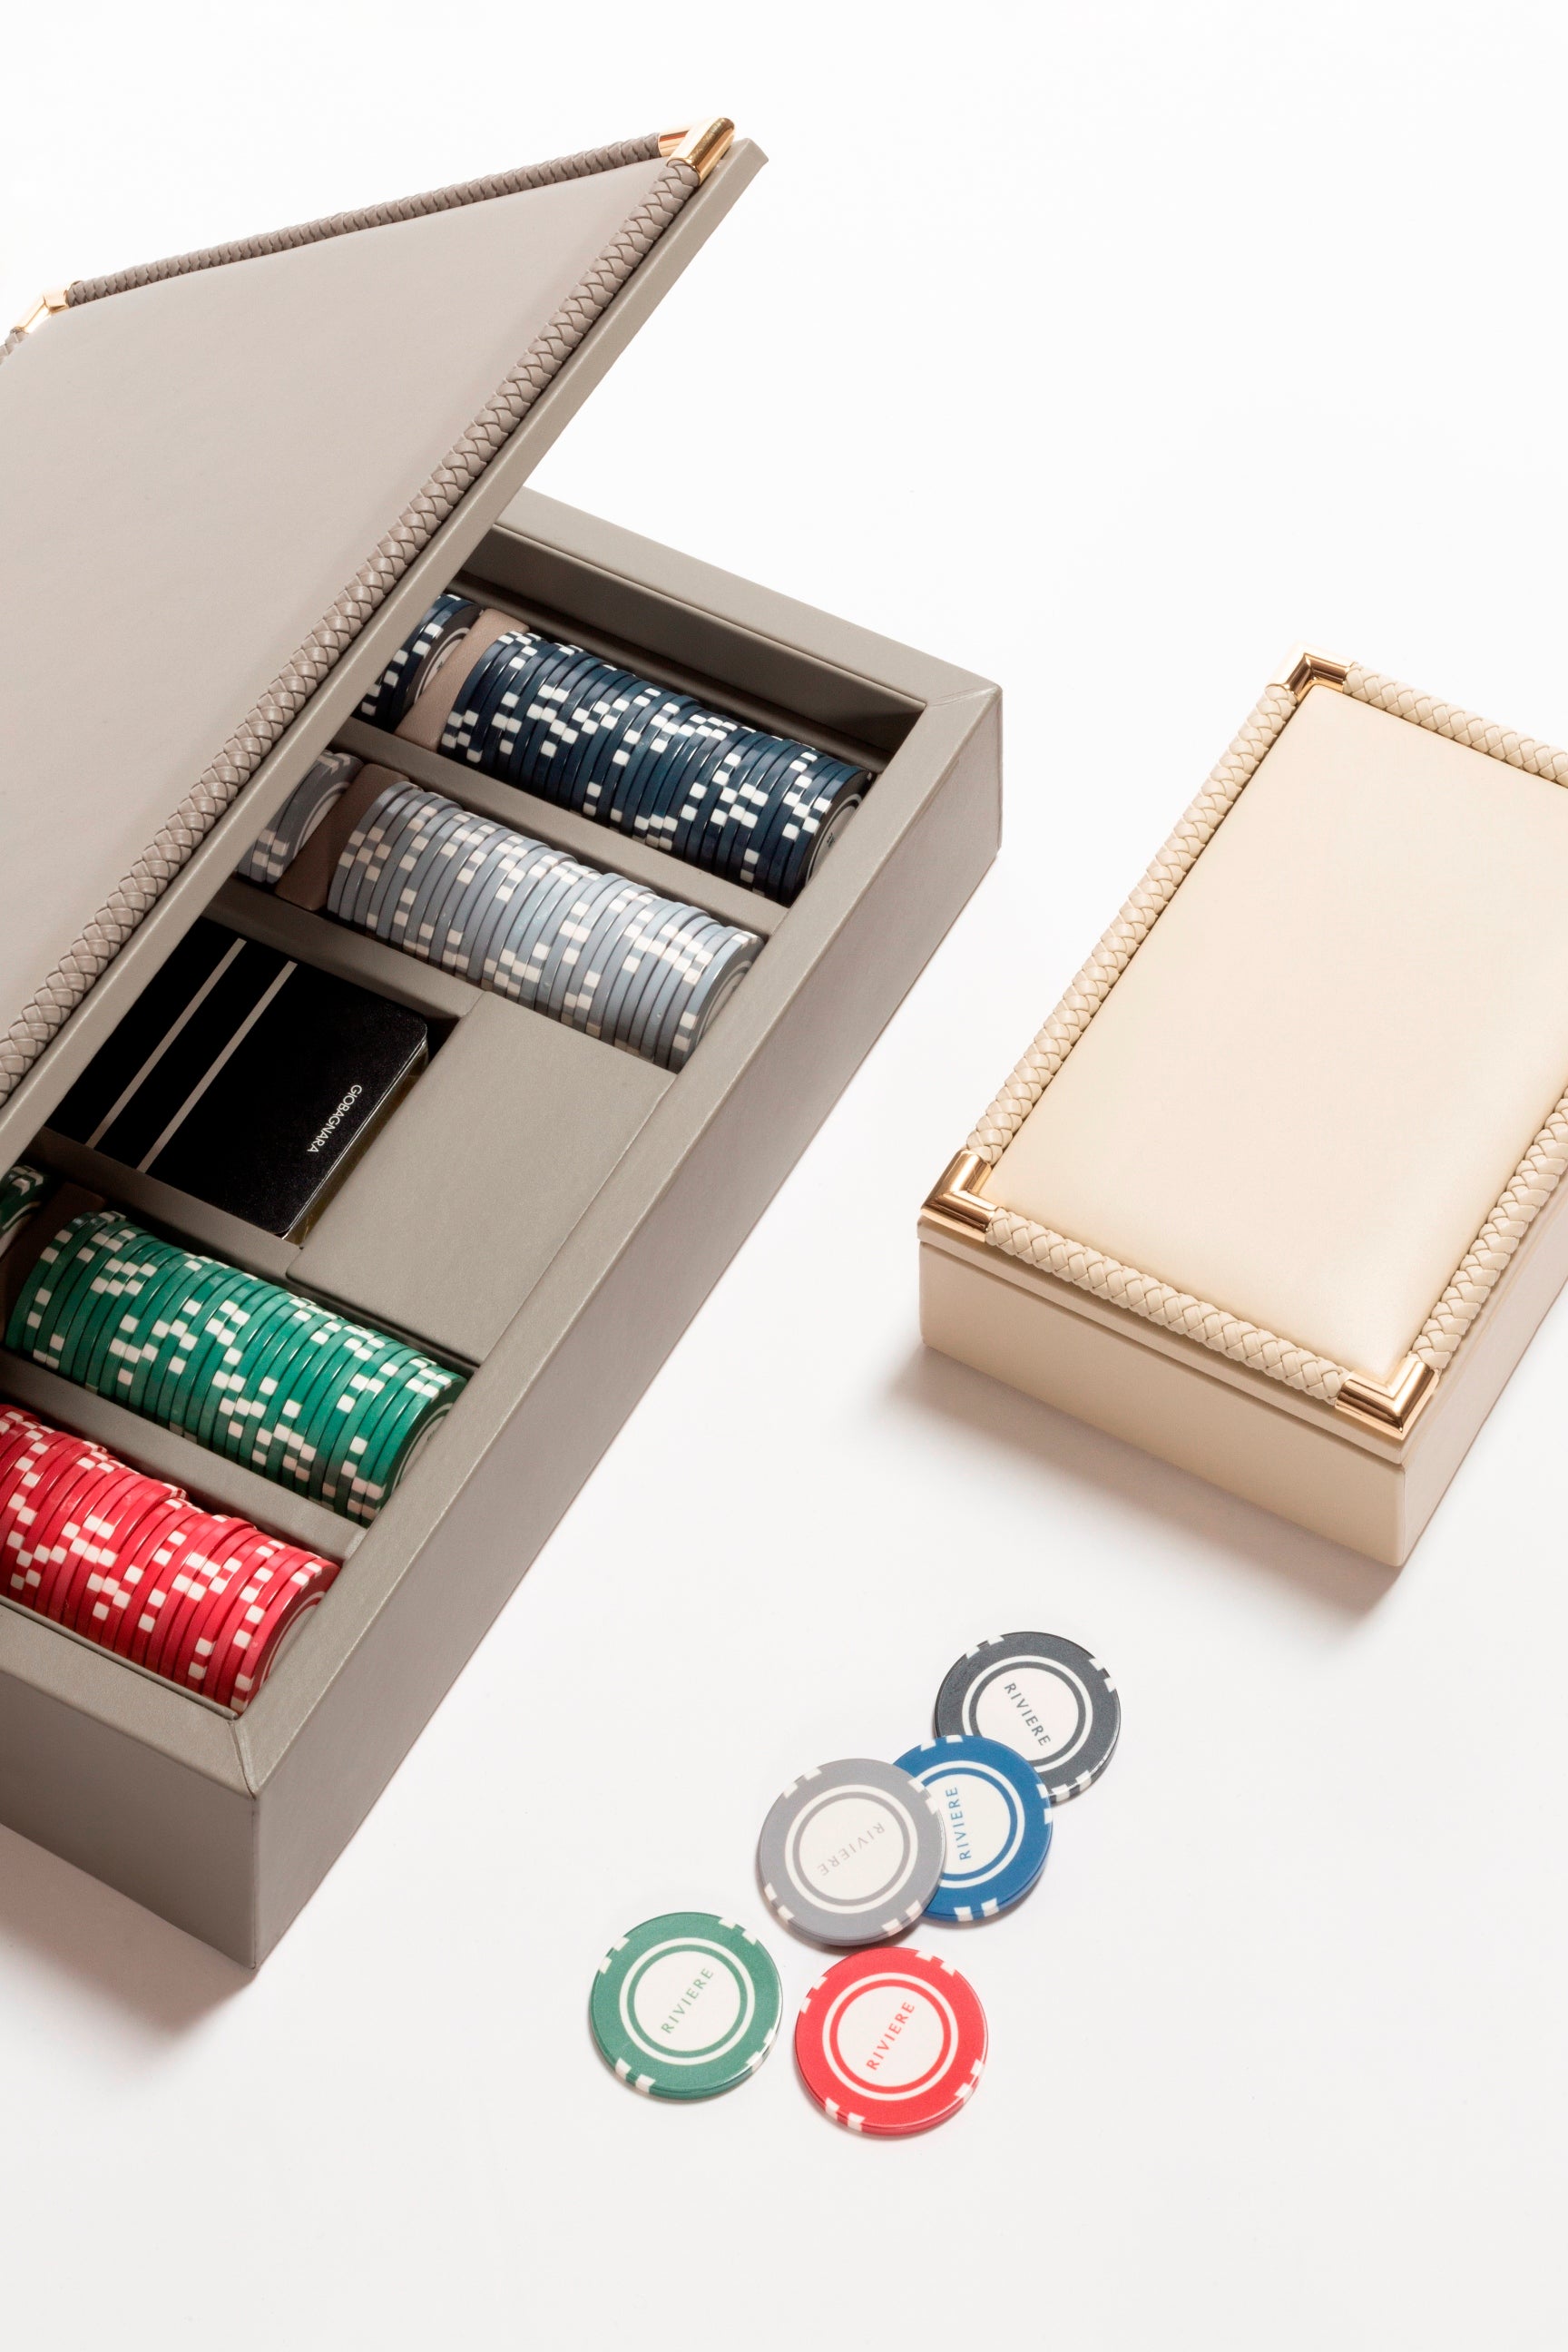 Riviere Thea Leather-Covered Poker Game Set With Braided Trim | Elegant Design with Braided Leather Trim and Metal Details | Includes 2 Decks of High-Quality Playing Cards | Explore a Range of Luxury Poker Game Sets at 2Jour Concierge, #1 luxury high-end gift & lifestyle shop